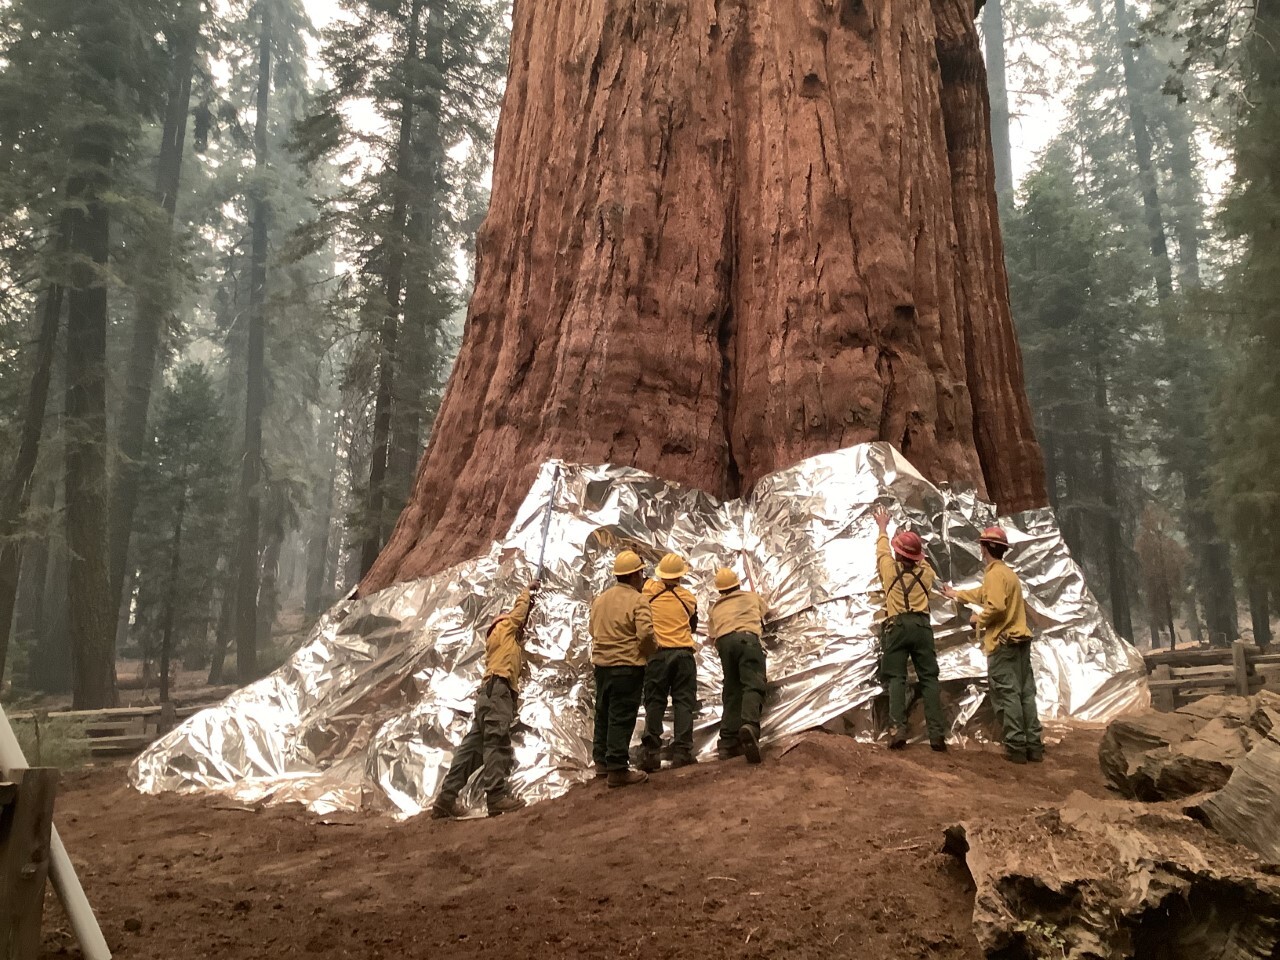 Six people wearing yellow and green Nomex fire clothes and hardhats wrap silver fire shelter material around the base of a very large giant sequoia tree.